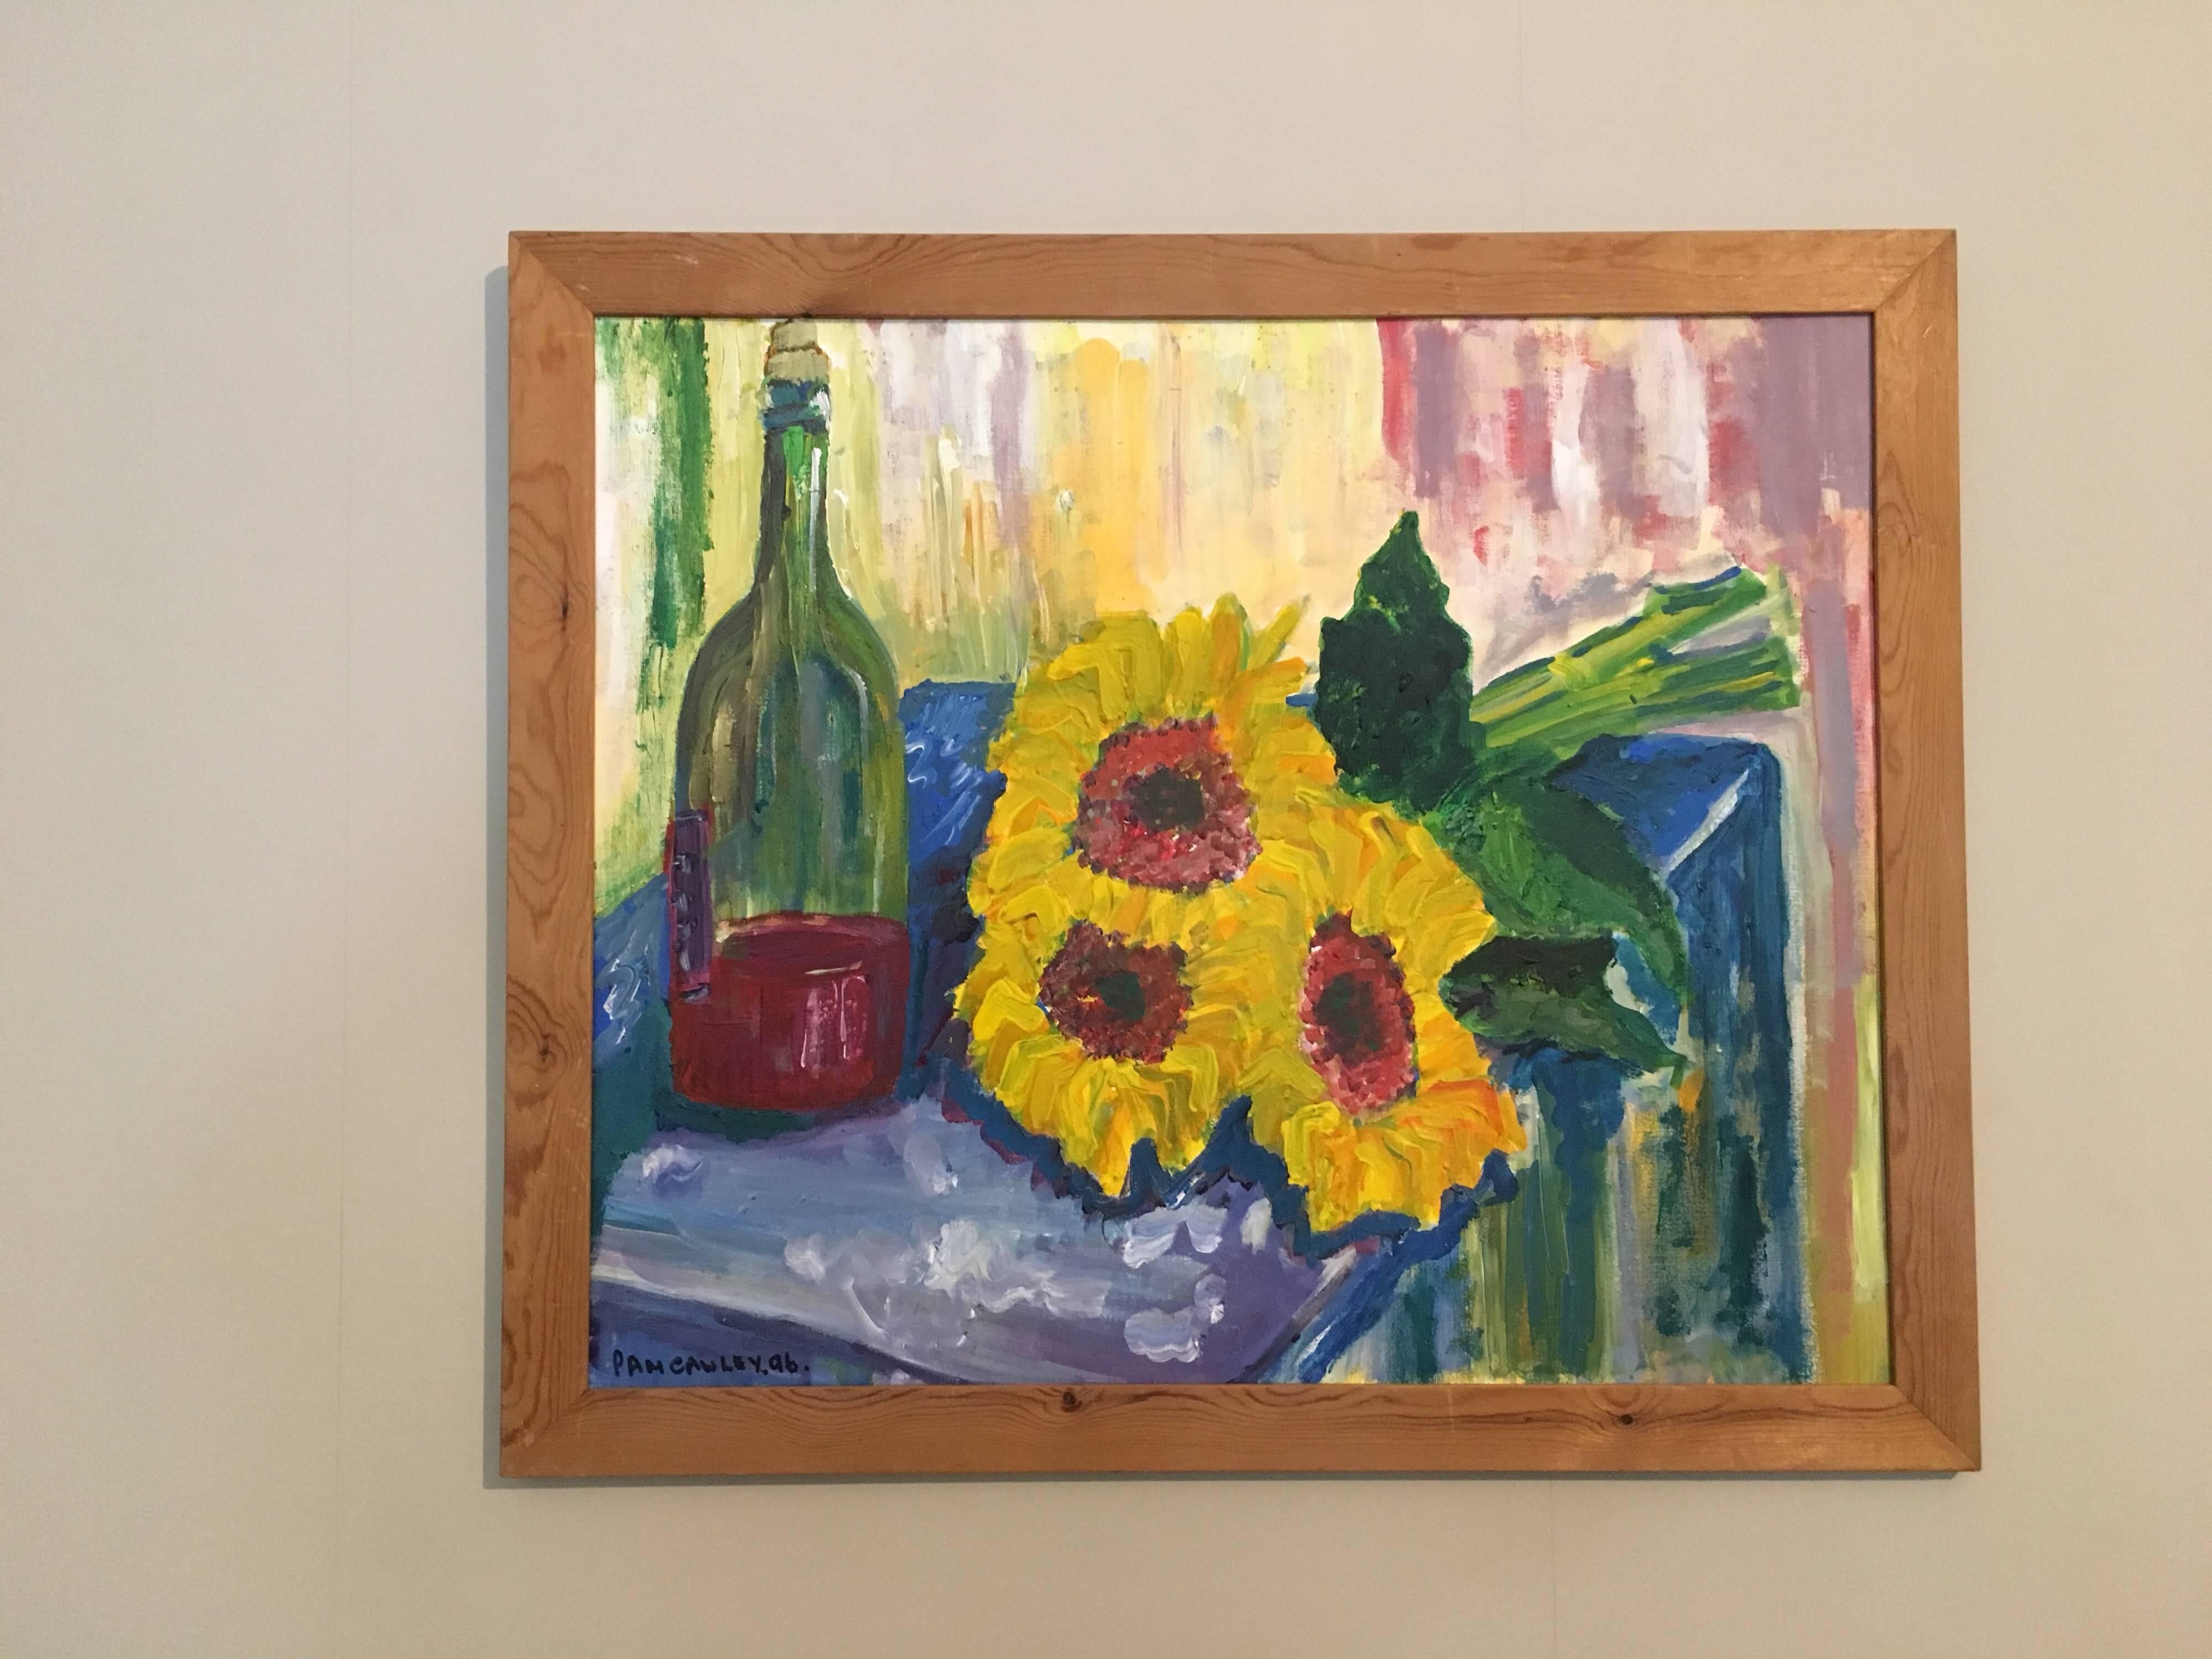 Sunflowers and Red Wine, Still Life, British Artist
by Pamela Cawley, British 20th century
oil painting on board, framed
22.5 x 26.5 inches 

Stunning original Impressionist oil painting by the 20th century British artist, Pamela Cawley. The work